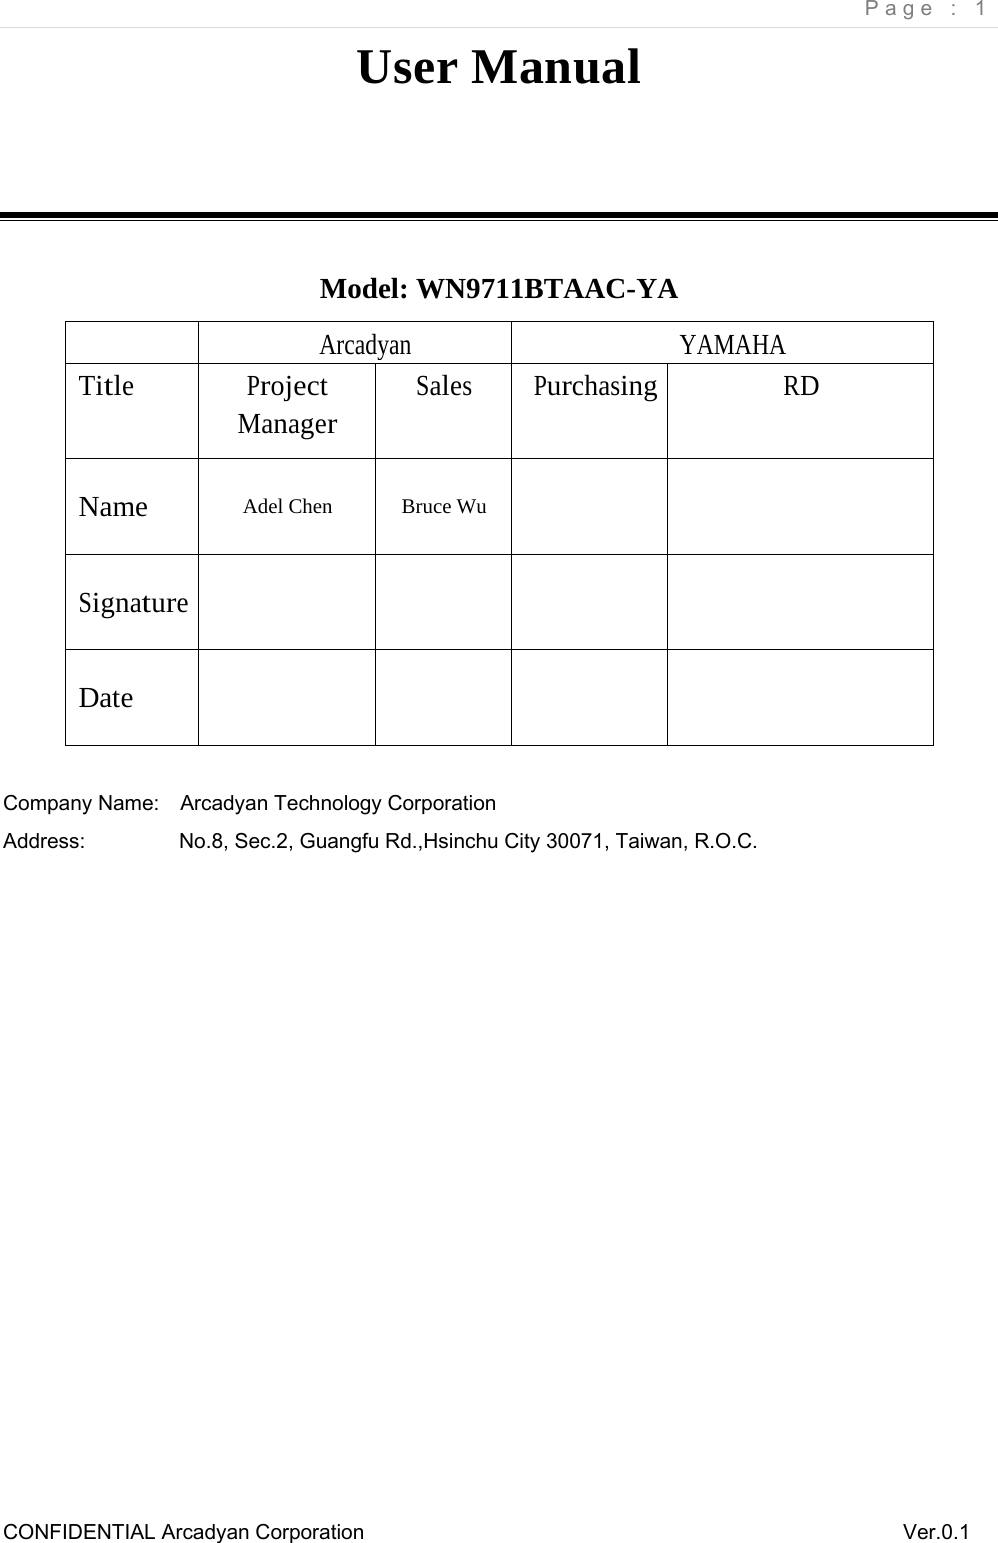     Page : 1 CONFIDENTIAL Arcadyan Corporation          Ver.0.1 User Manual   Model: WN9711BTAAC-YA  Arcadyan YAMAHA Title Project Manager Sales Purchasing RD Name  Adel Chen  Bruce Wu      Signature     Date      Company Name:    Arcadyan Technology Corporation Address:         No.8, Sec.2, Guangfu Rd.,Hsinchu City 30071, Taiwan, R.O.C.